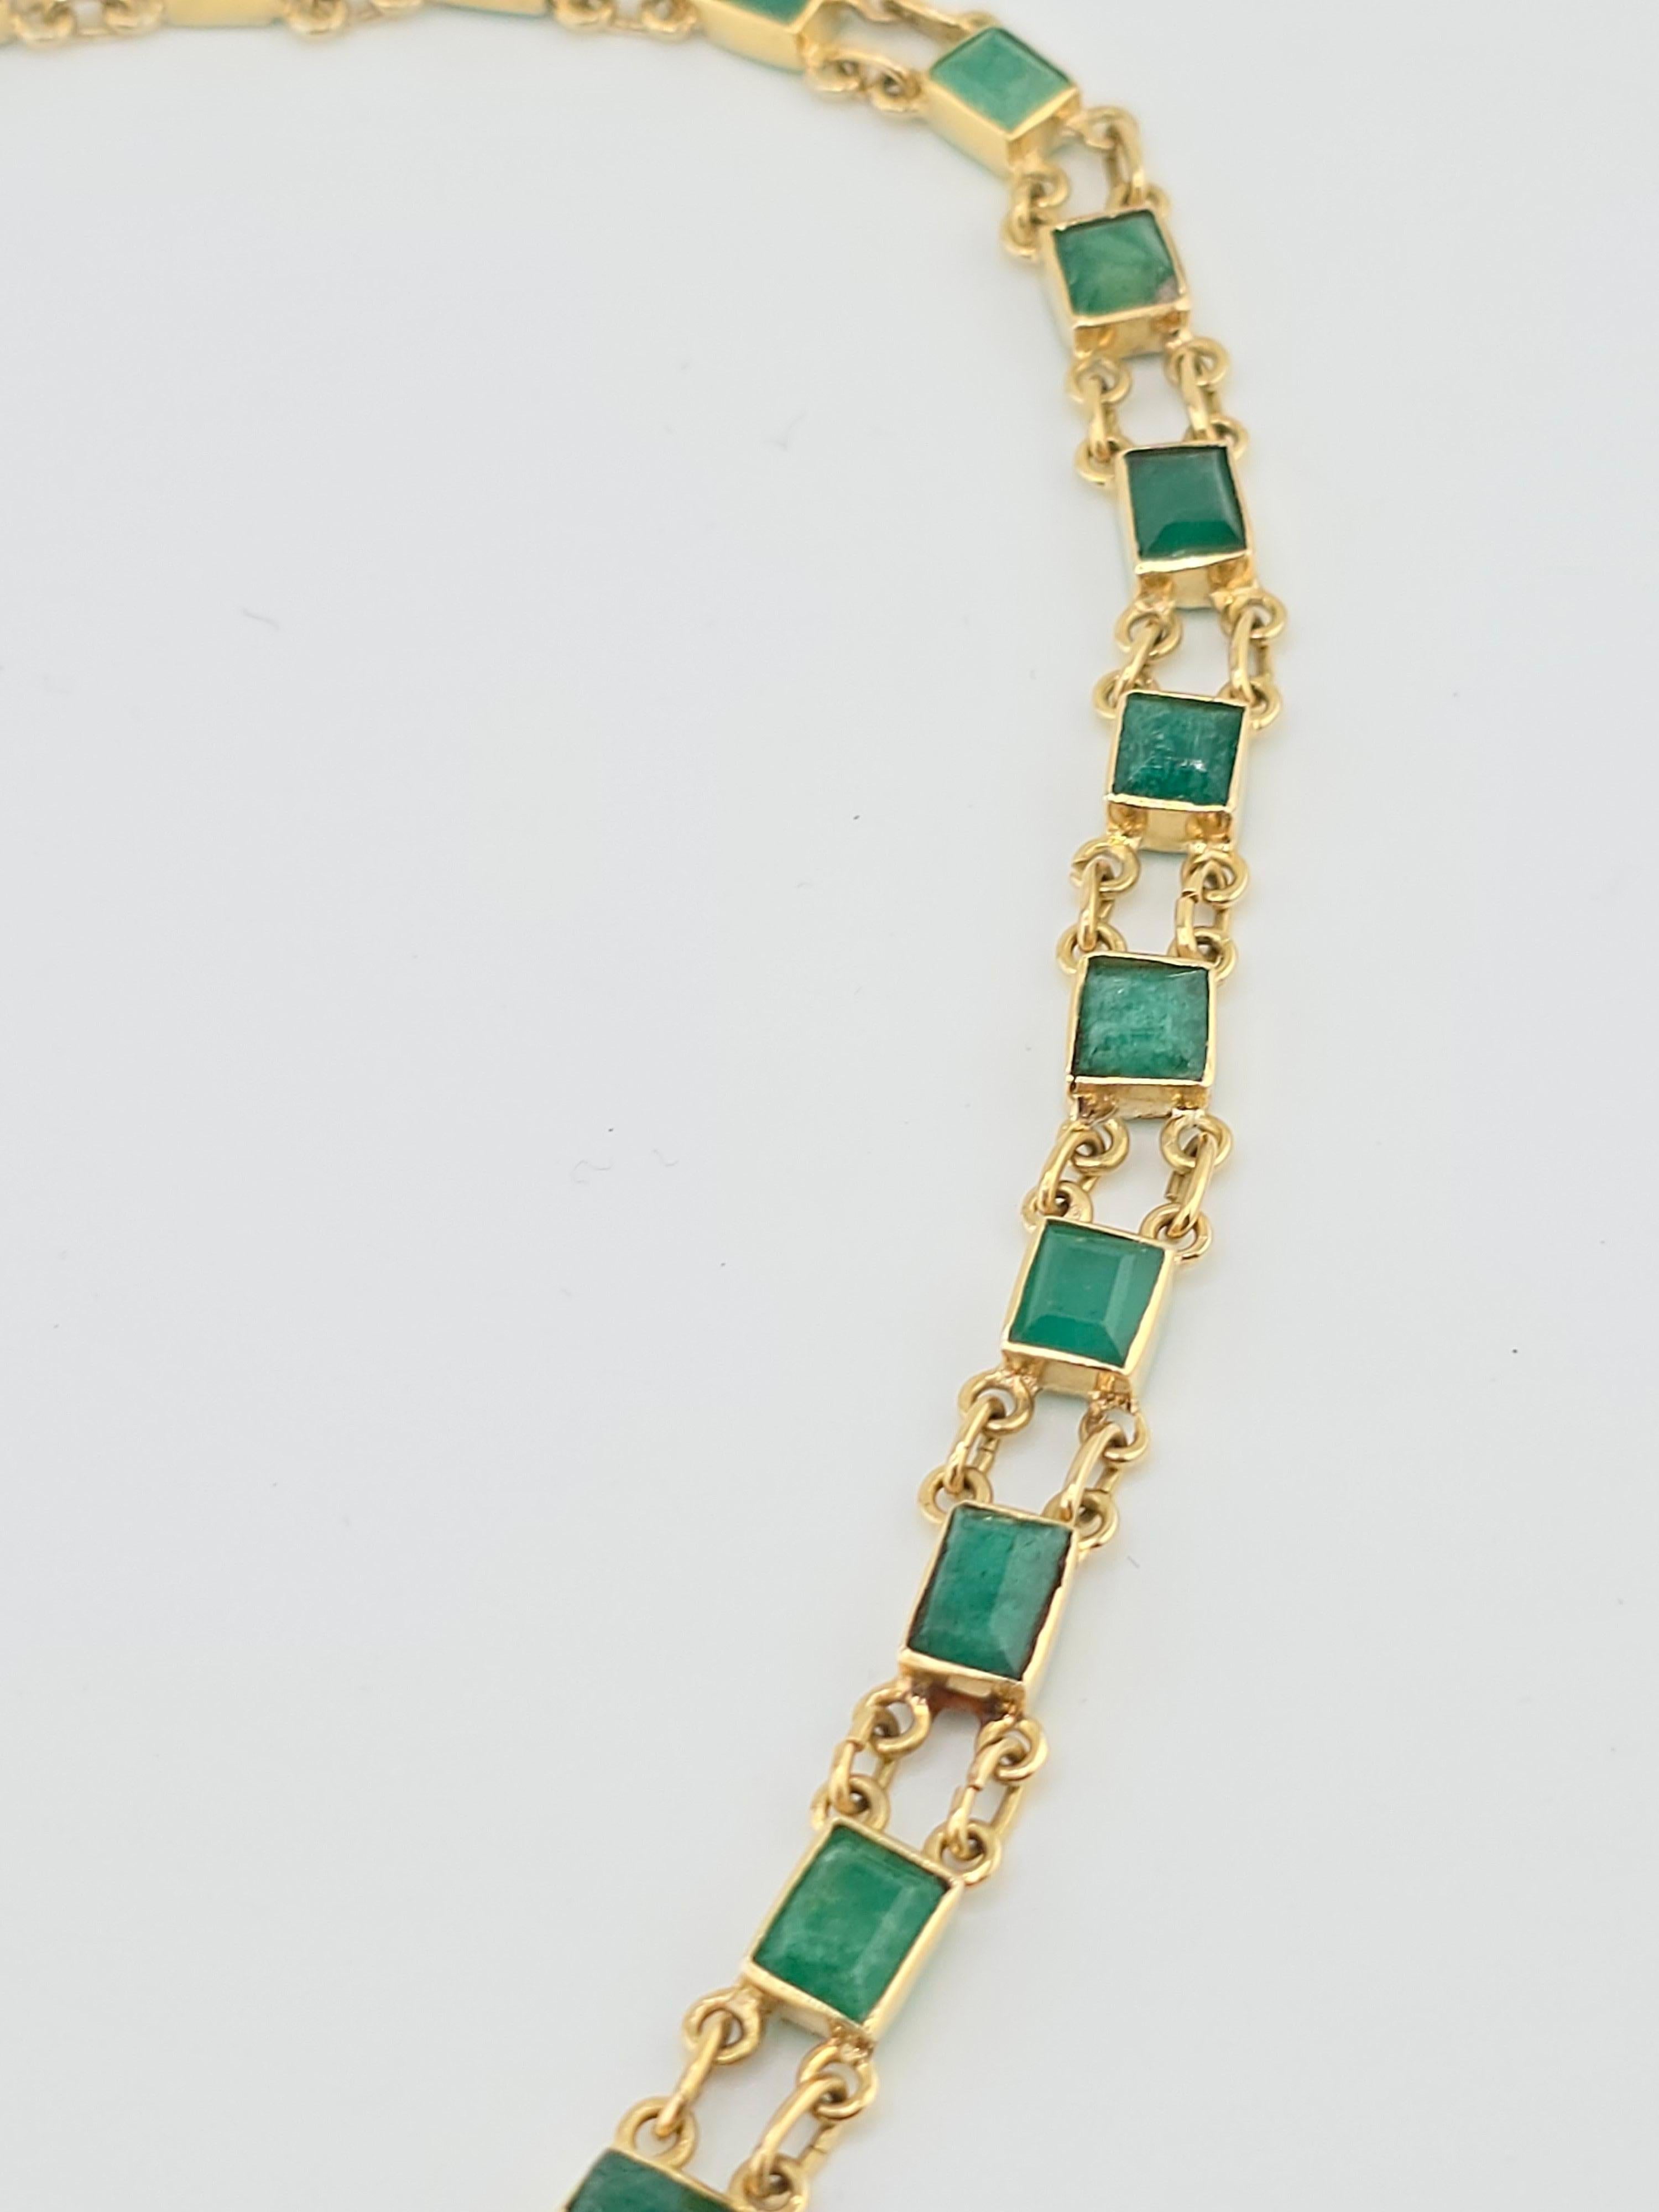 Majestic 14K Yellow Gold & Emerald Necklace 31.74 Grams For Sale 5